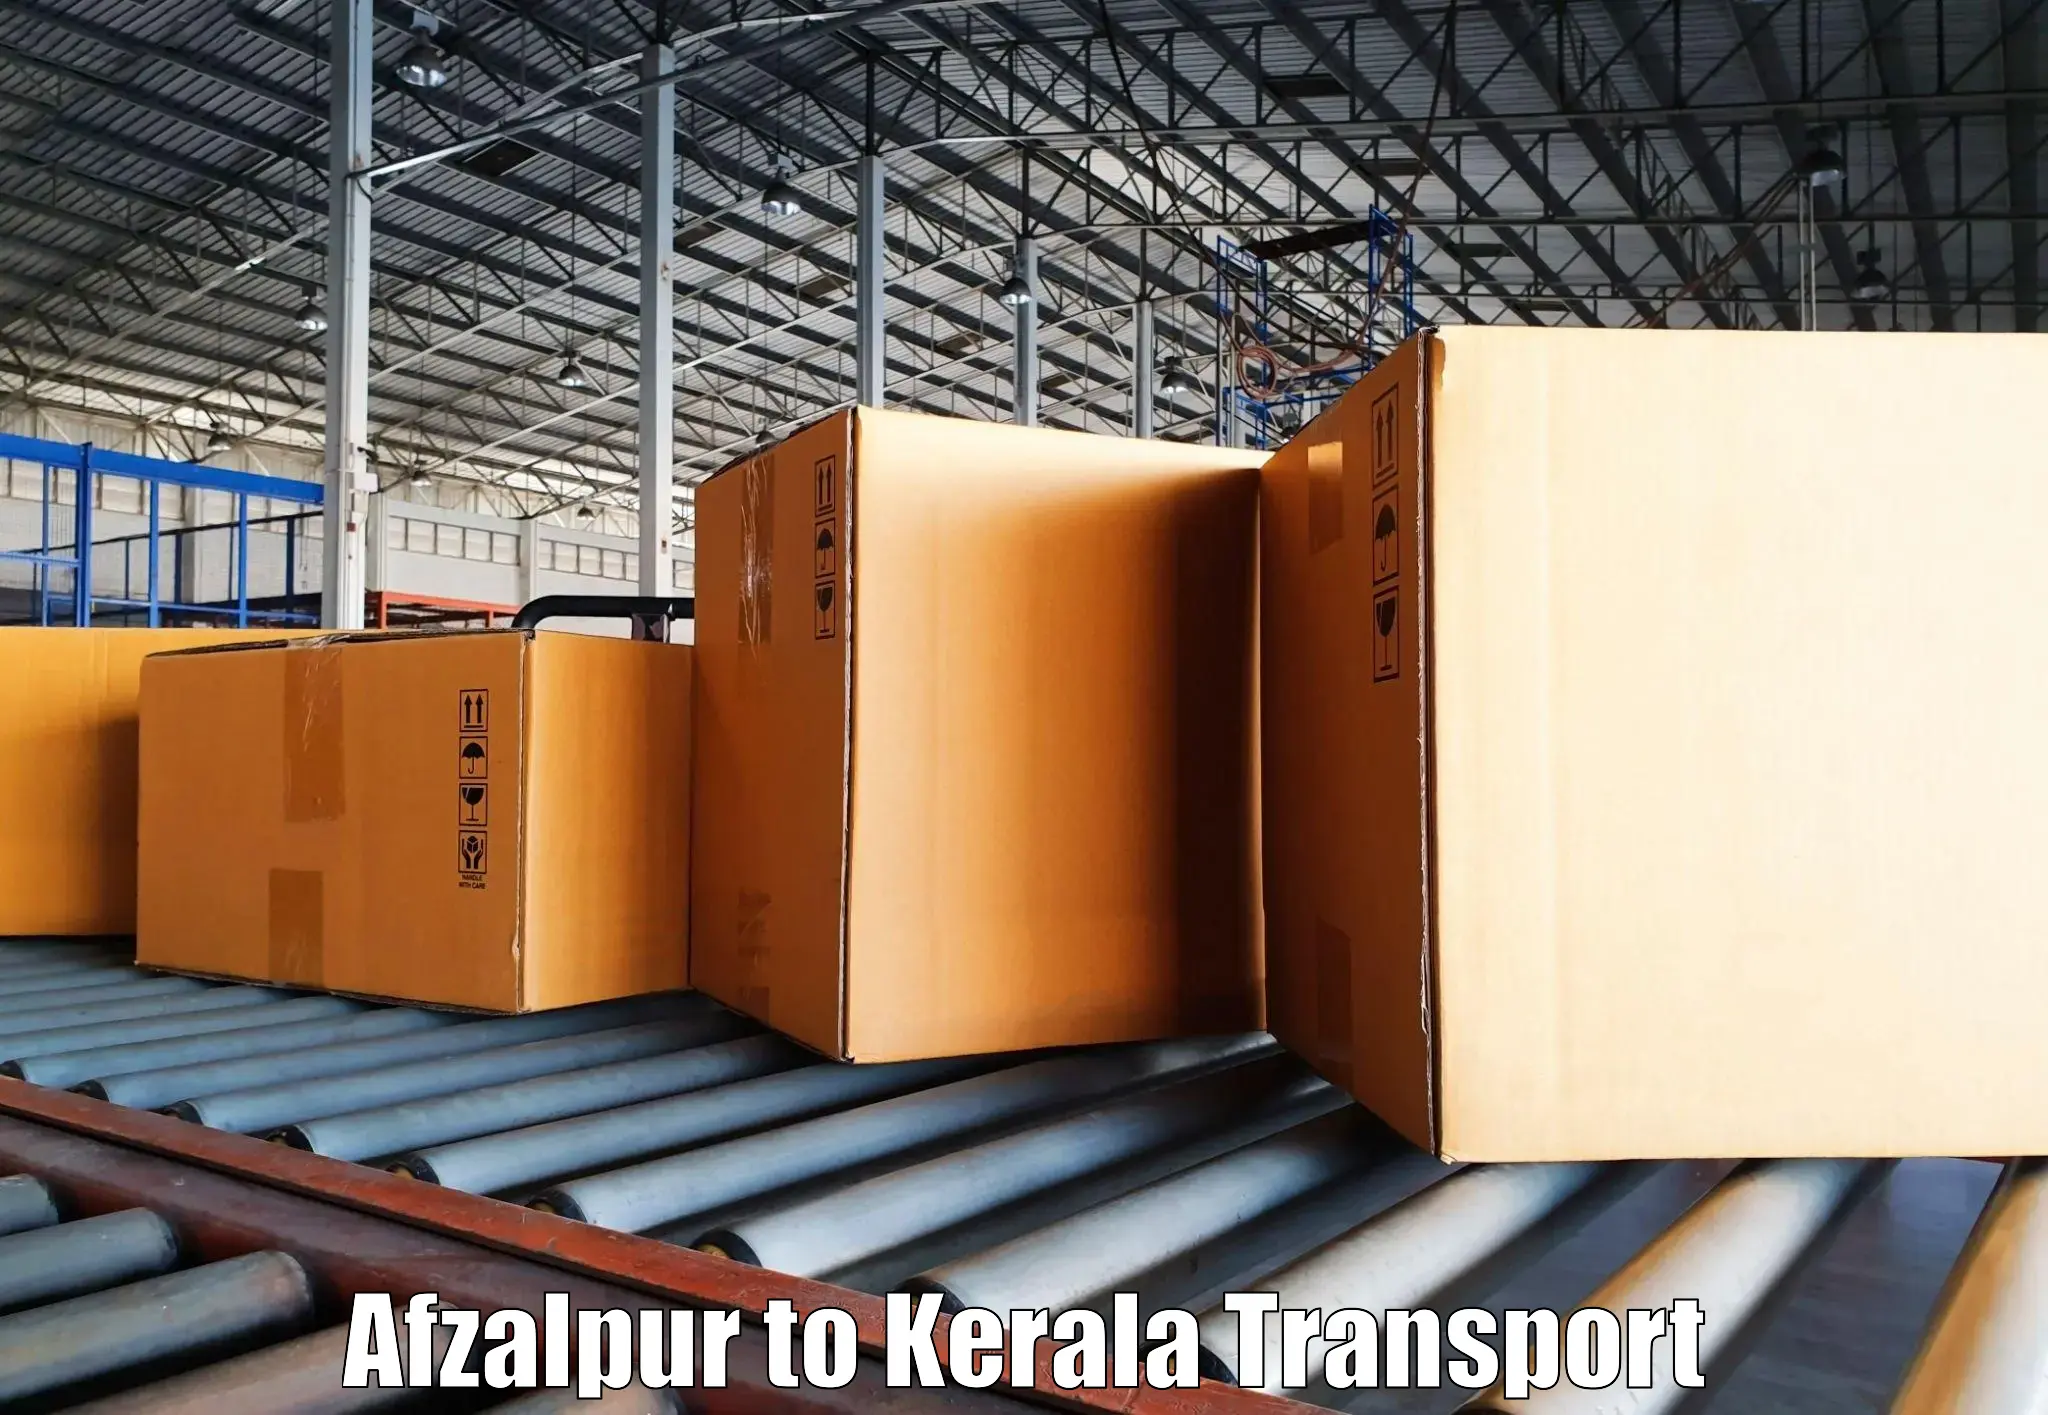 Interstate transport services Afzalpur to Ernakulam